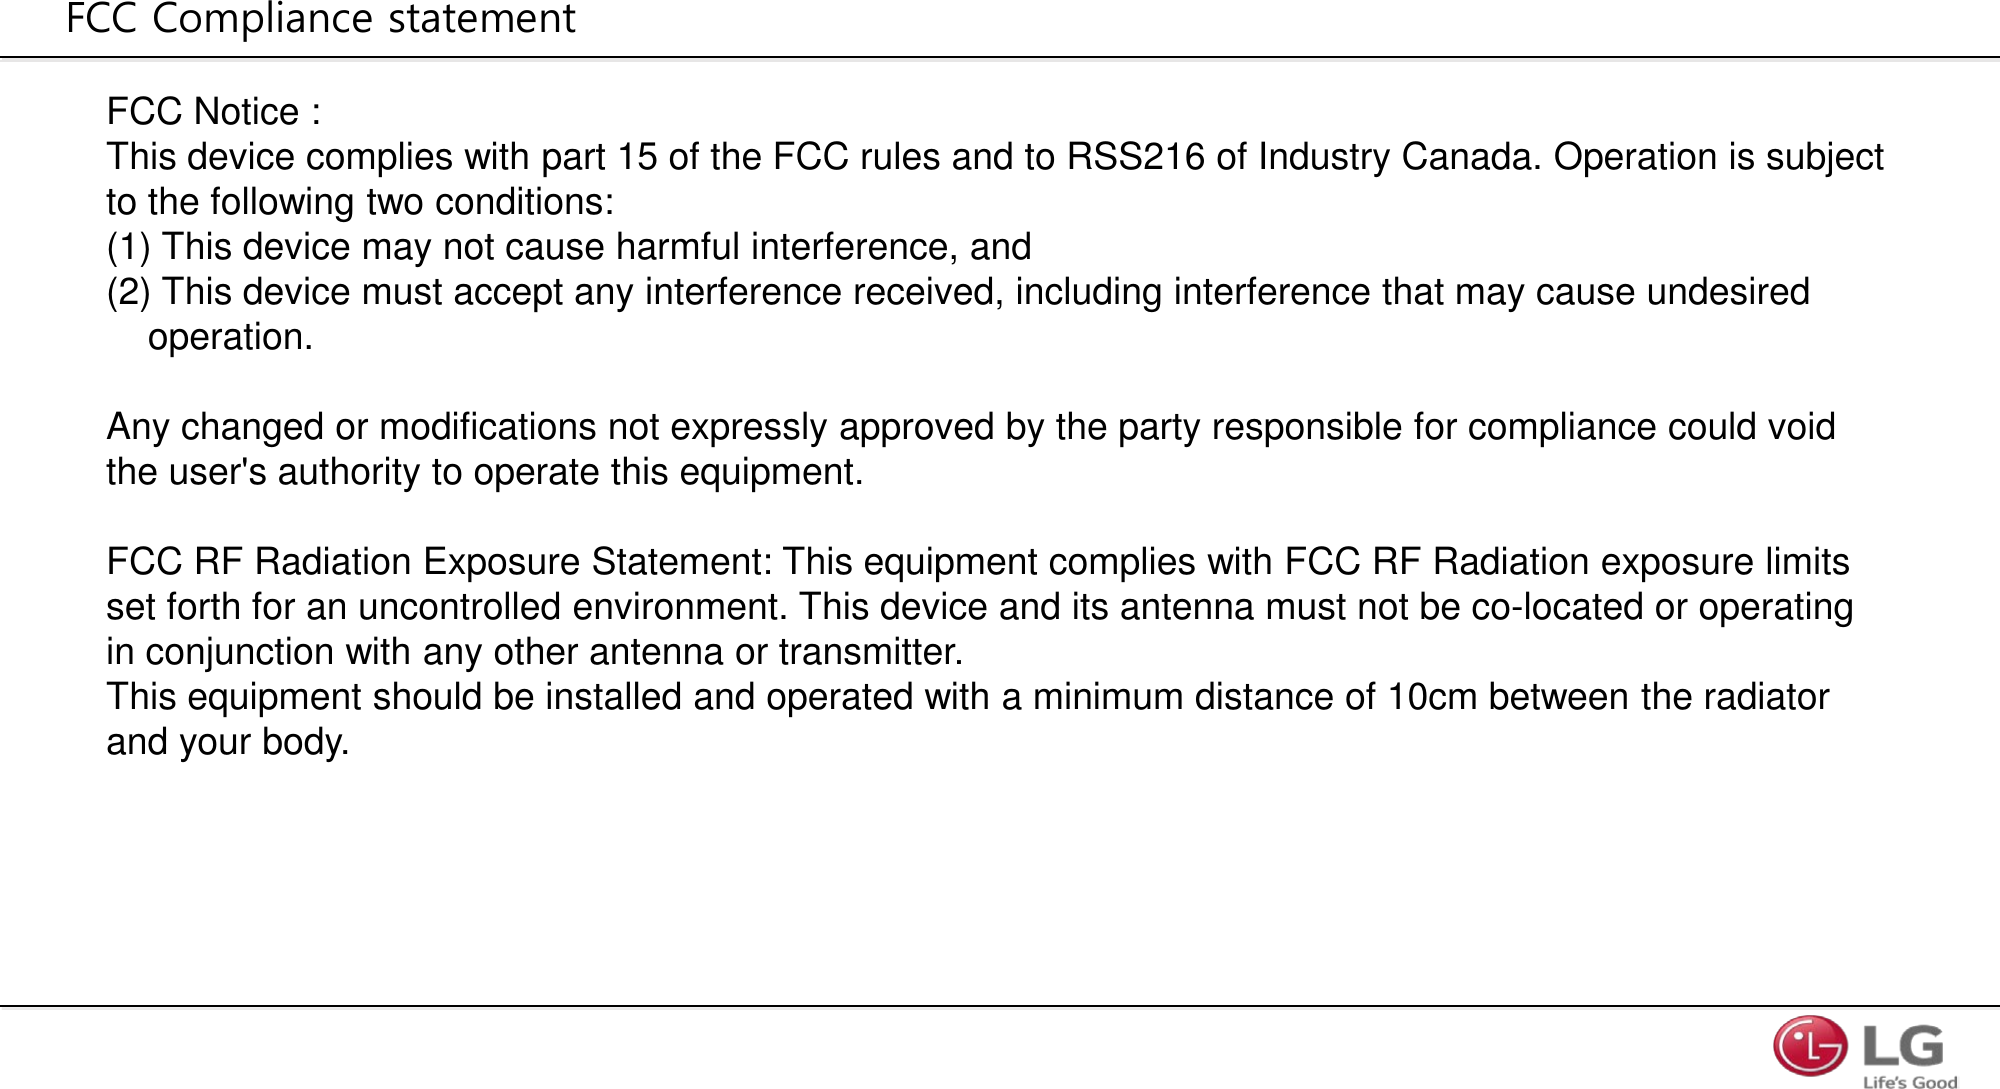 FCC Notice :  This device complies with part 15 of the FCC rules and to RSS216 of Industry Canada. Operation is subject to the following two conditions: (1) This device may not cause harmful interference, and (2) This device must accept any interference received, including interference that may cause undesired      operation.   Any changed or modifications not expressly approved by the party responsible for compliance could void  the user&apos;s authority to operate this equipment.   FCC RF Radiation Exposure Statement: This equipment complies with FCC RF Radiation exposure limits  set forth for an uncontrolled environment. This device and its antenna must not be co-located or operating  in conjunction with any other antenna or transmitter. This equipment should be installed and operated with a minimum distance of 10cm between the radiator  and your body. FCC Compliance statement 